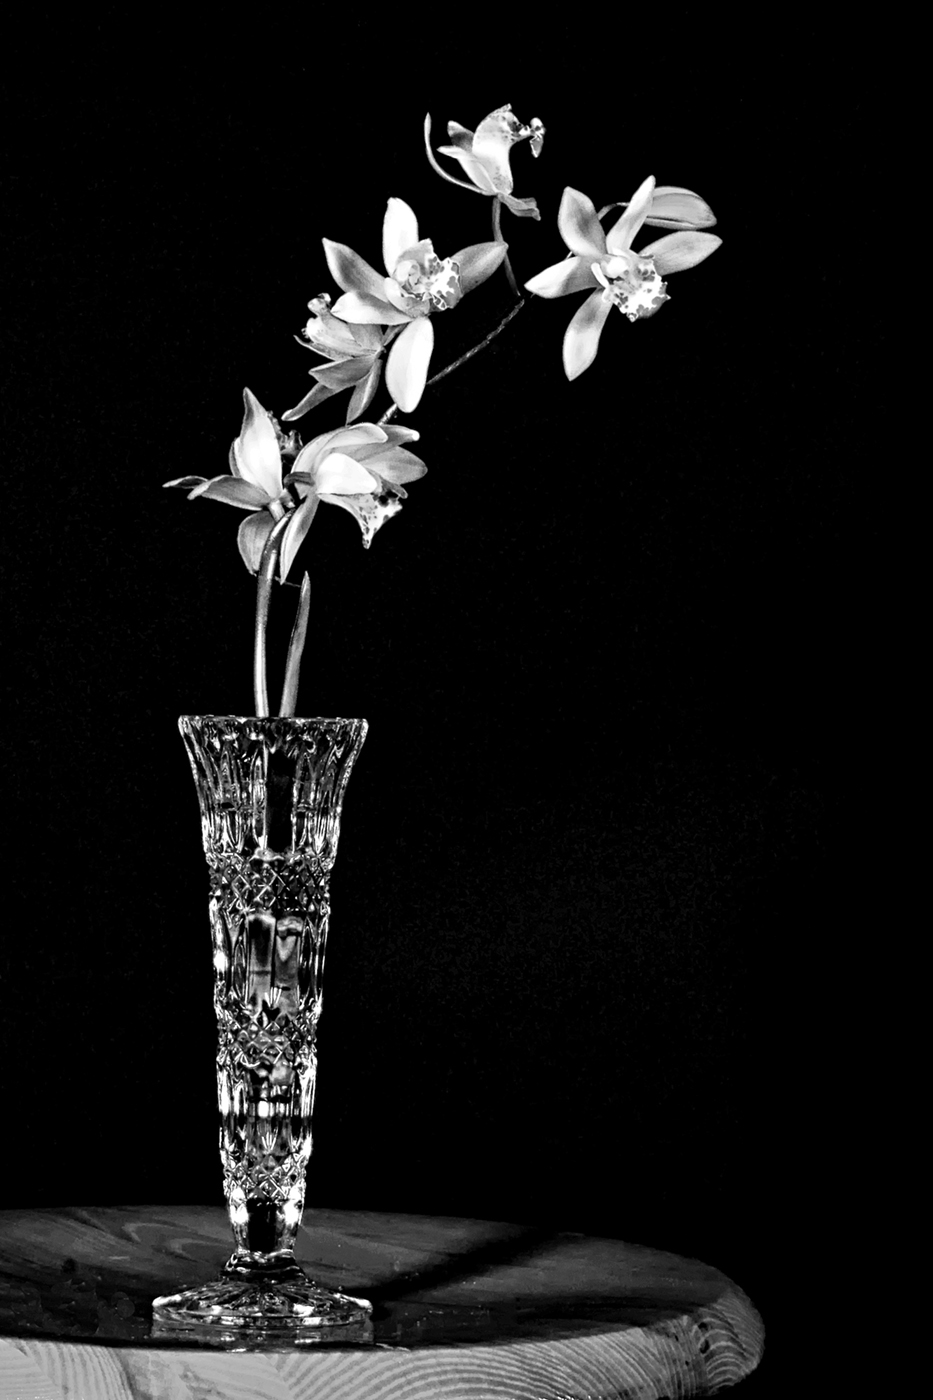 Wood, water, glass and flower by Wes Odell